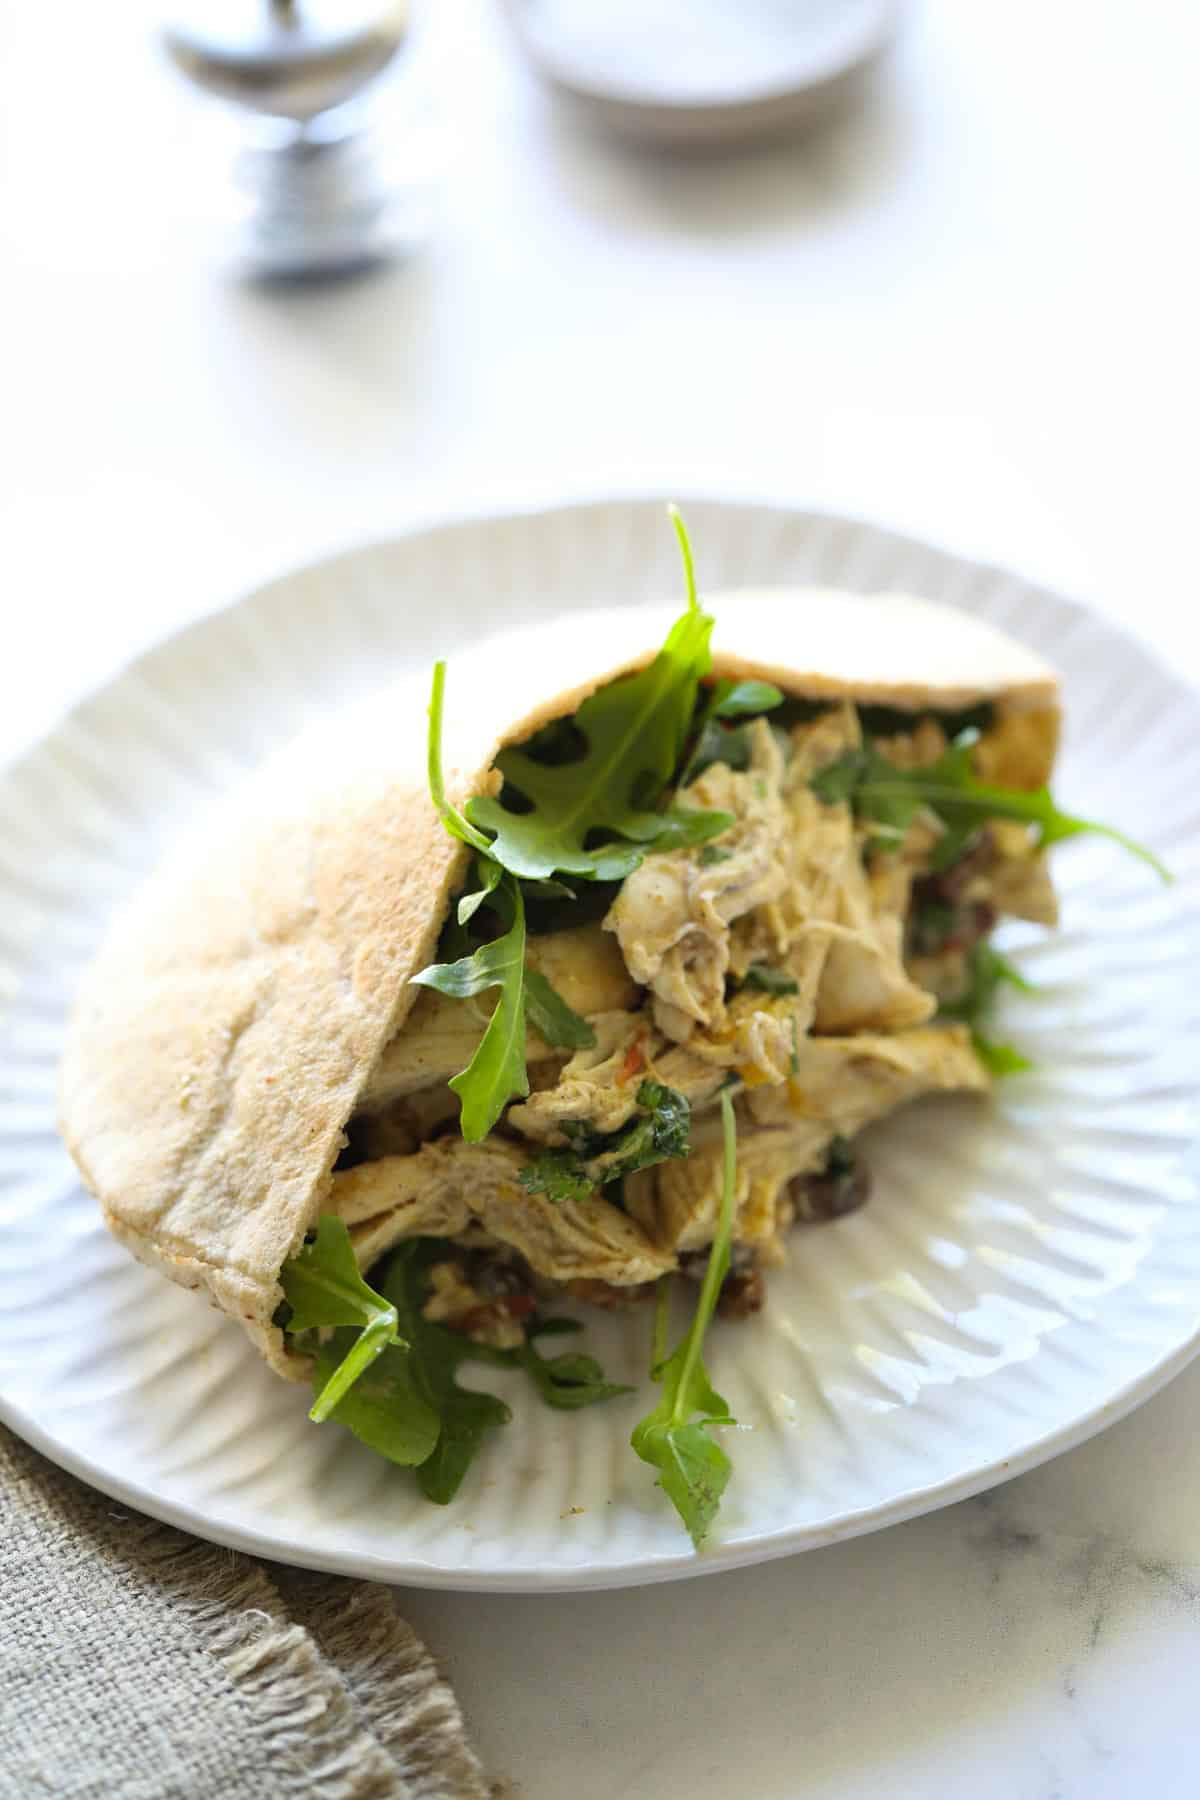 a pita sandwich filled with chicken salad and greens